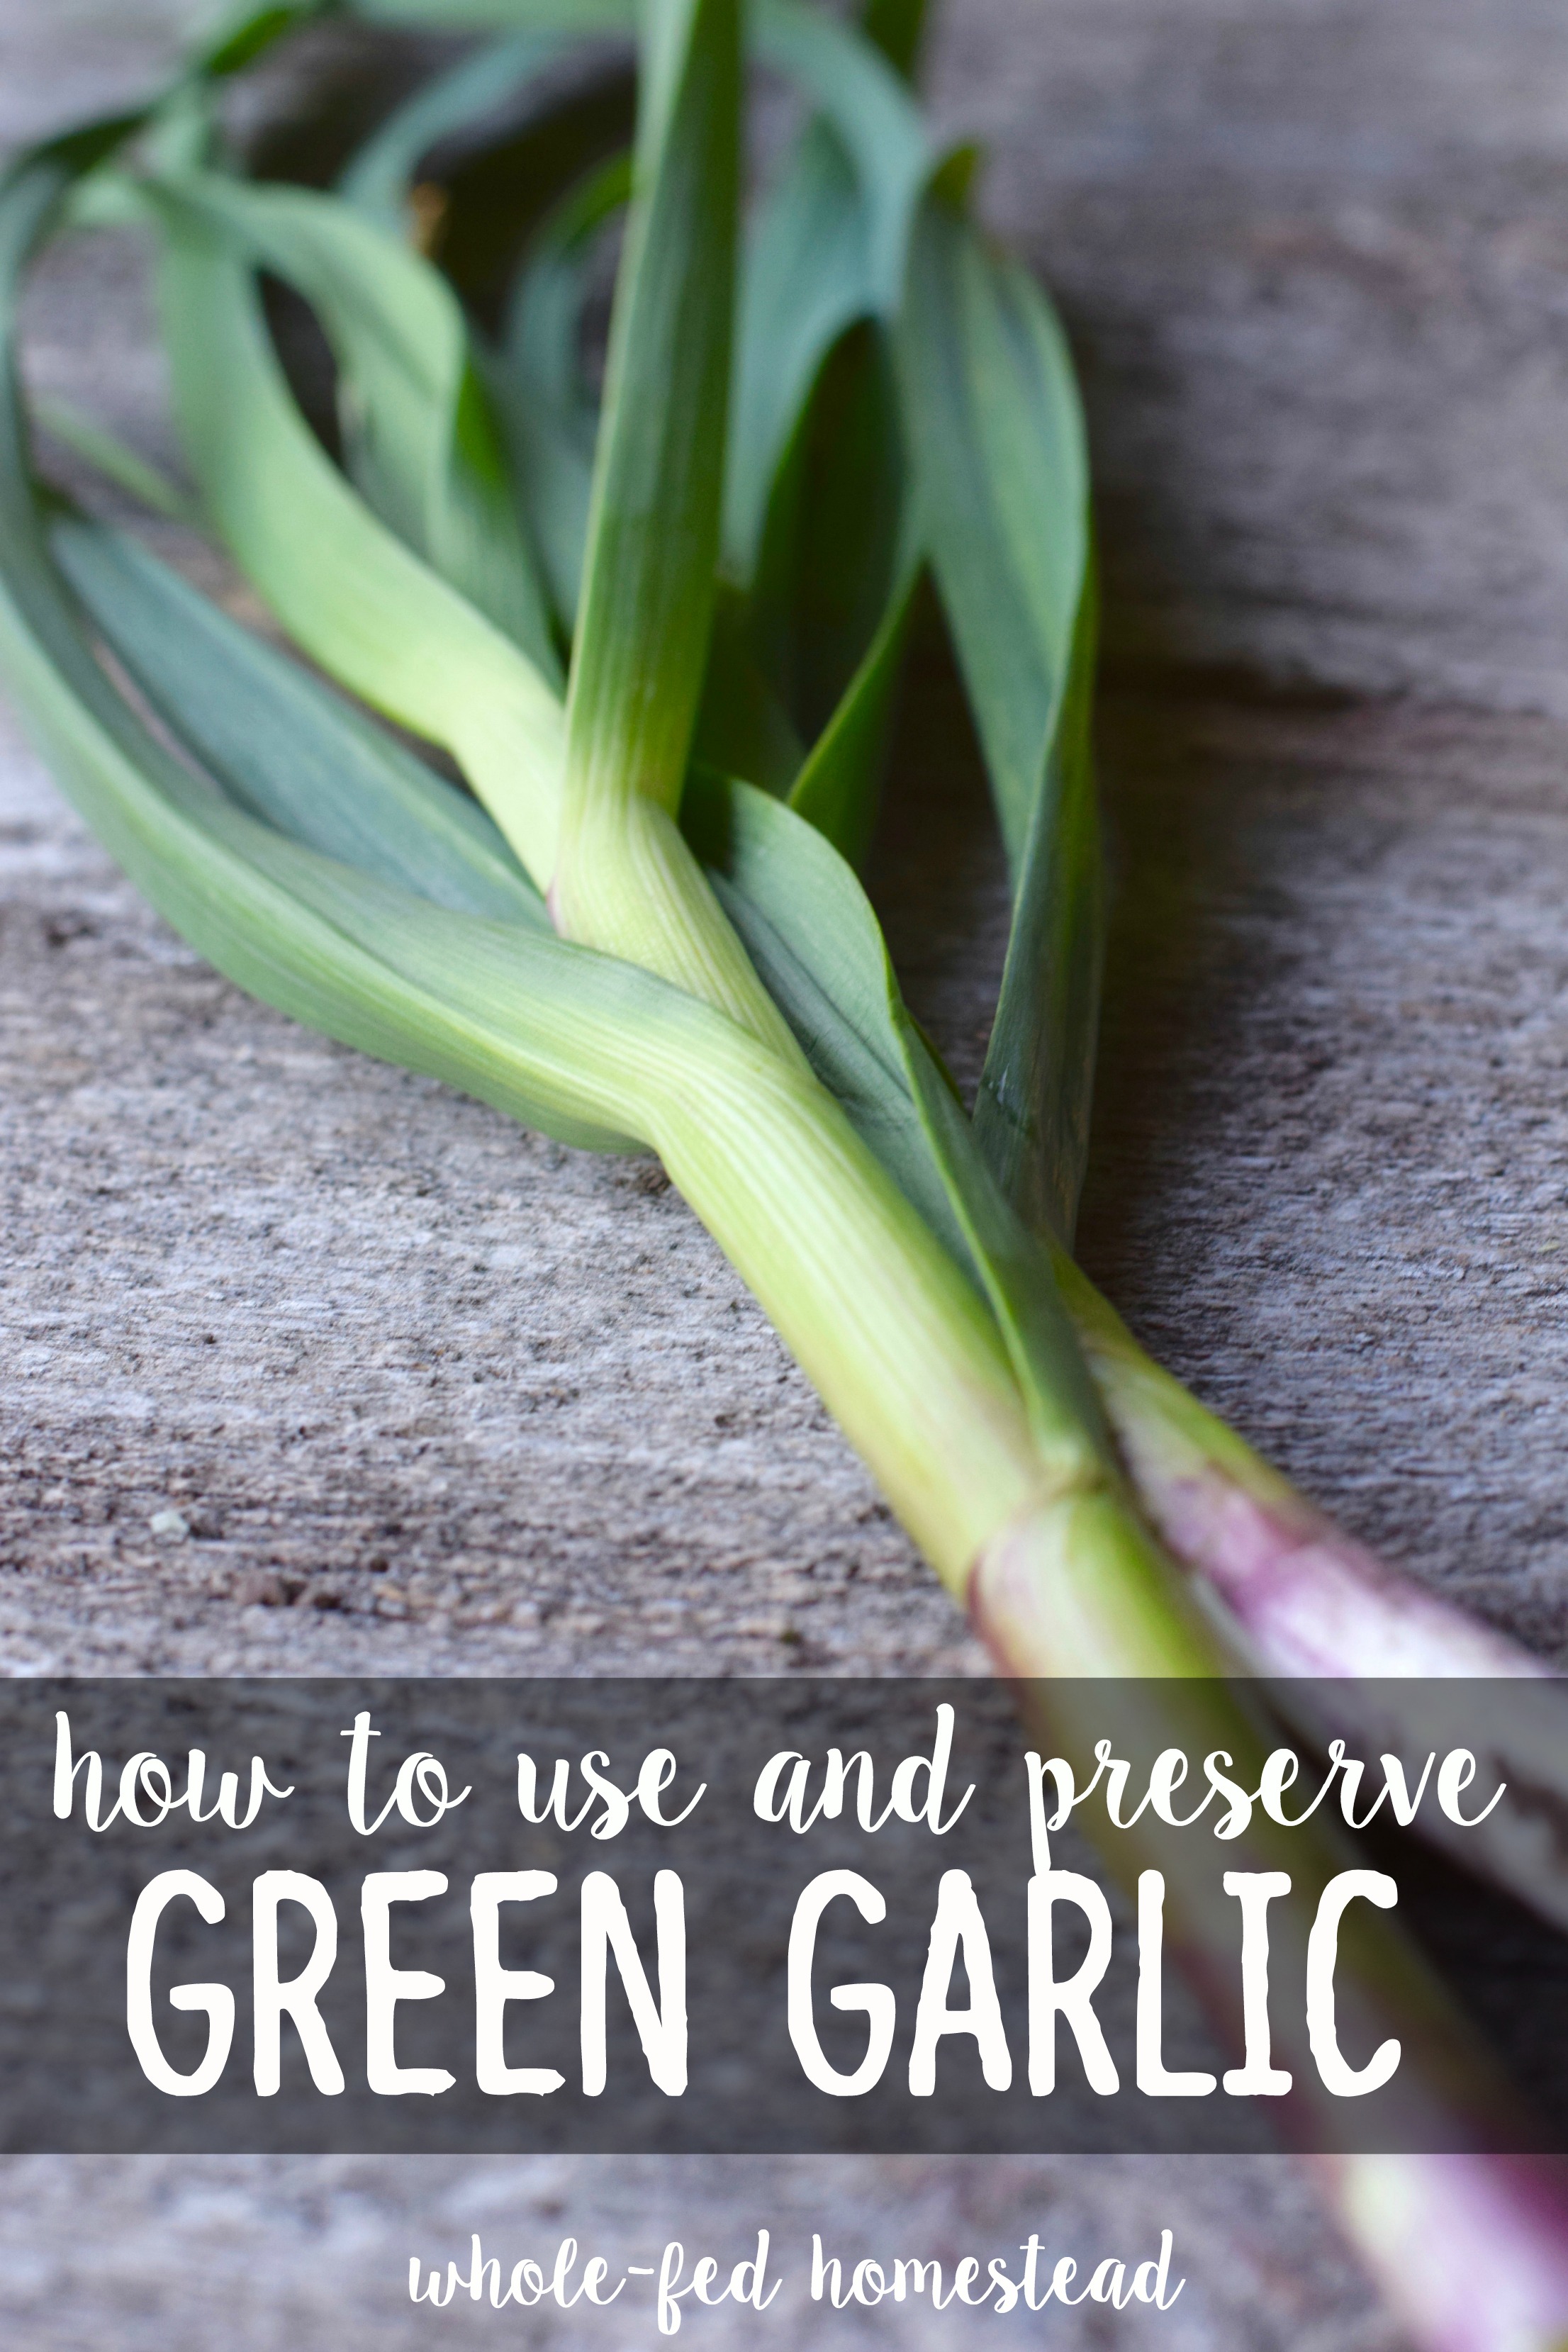 How to Use and Preserve Green Garlic